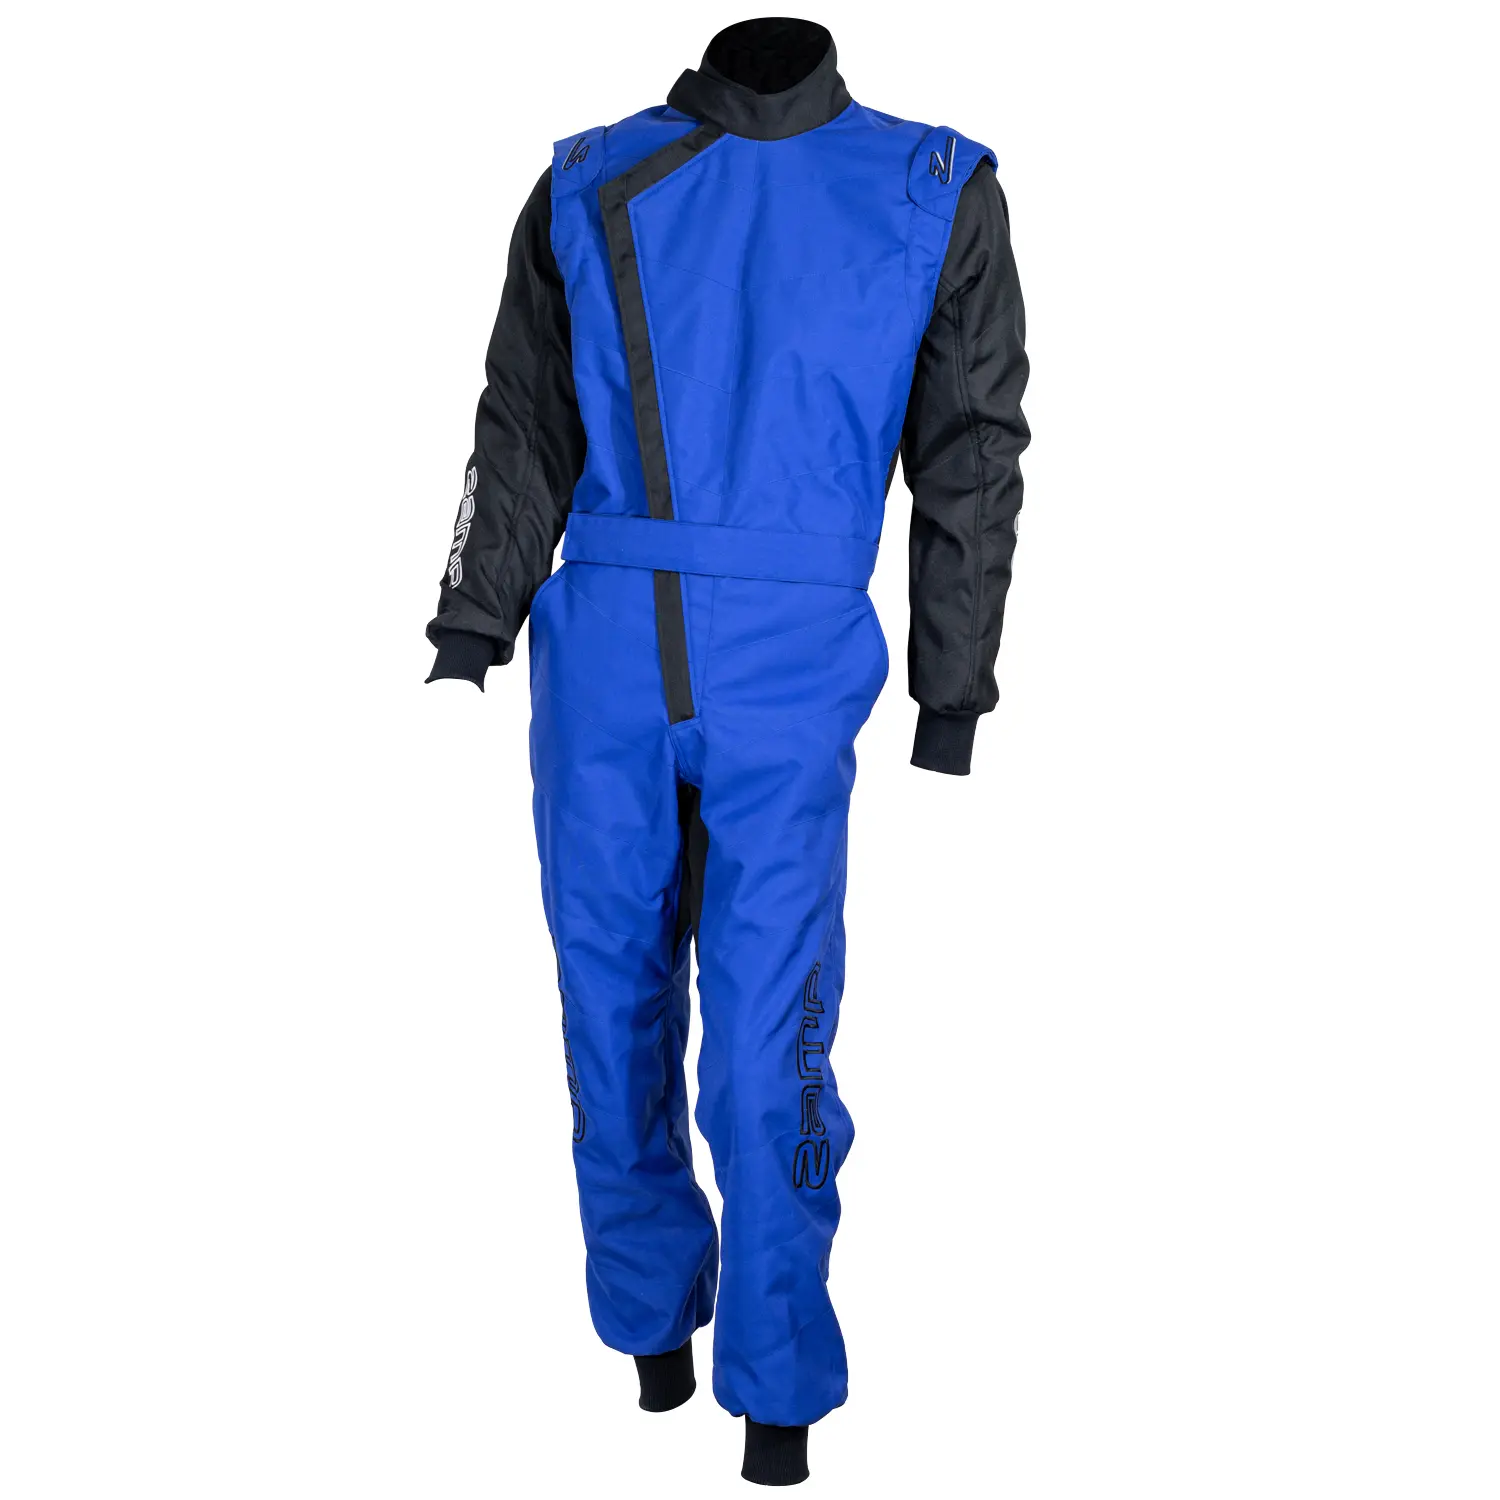 ZK-40 Kart Racing Youth Suit